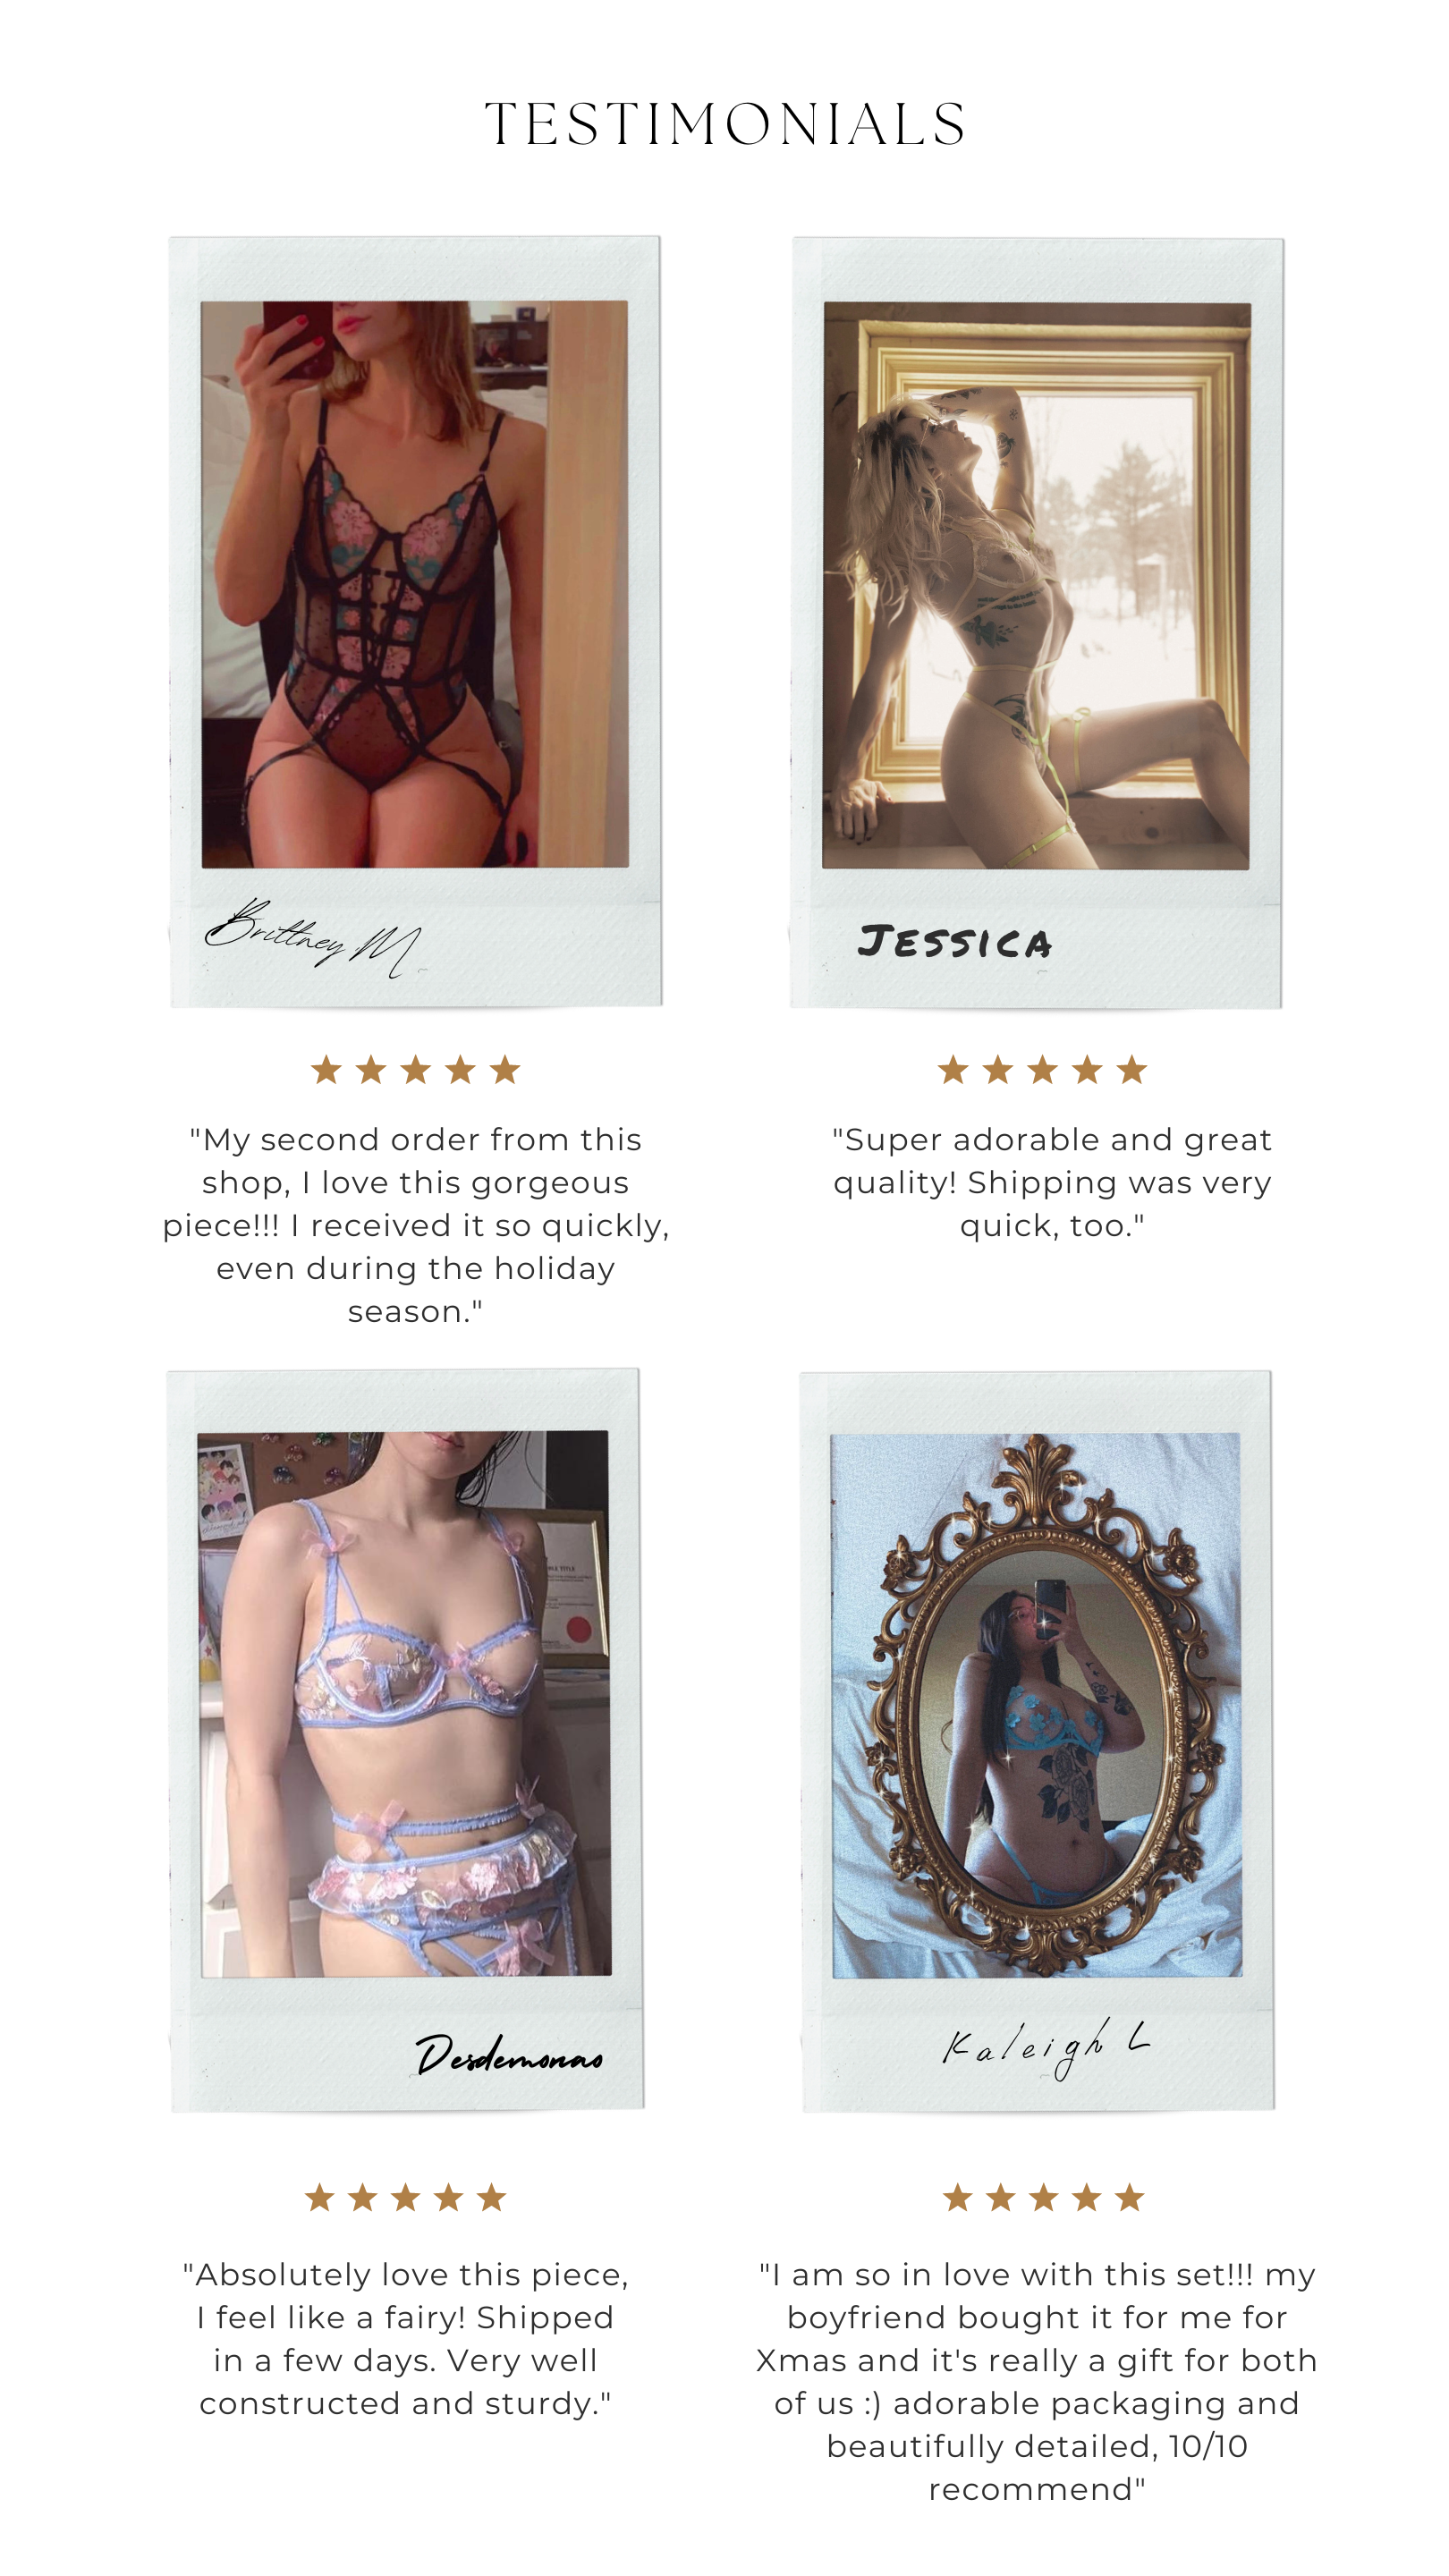 Moxy intimates reviews, new lingerie brand